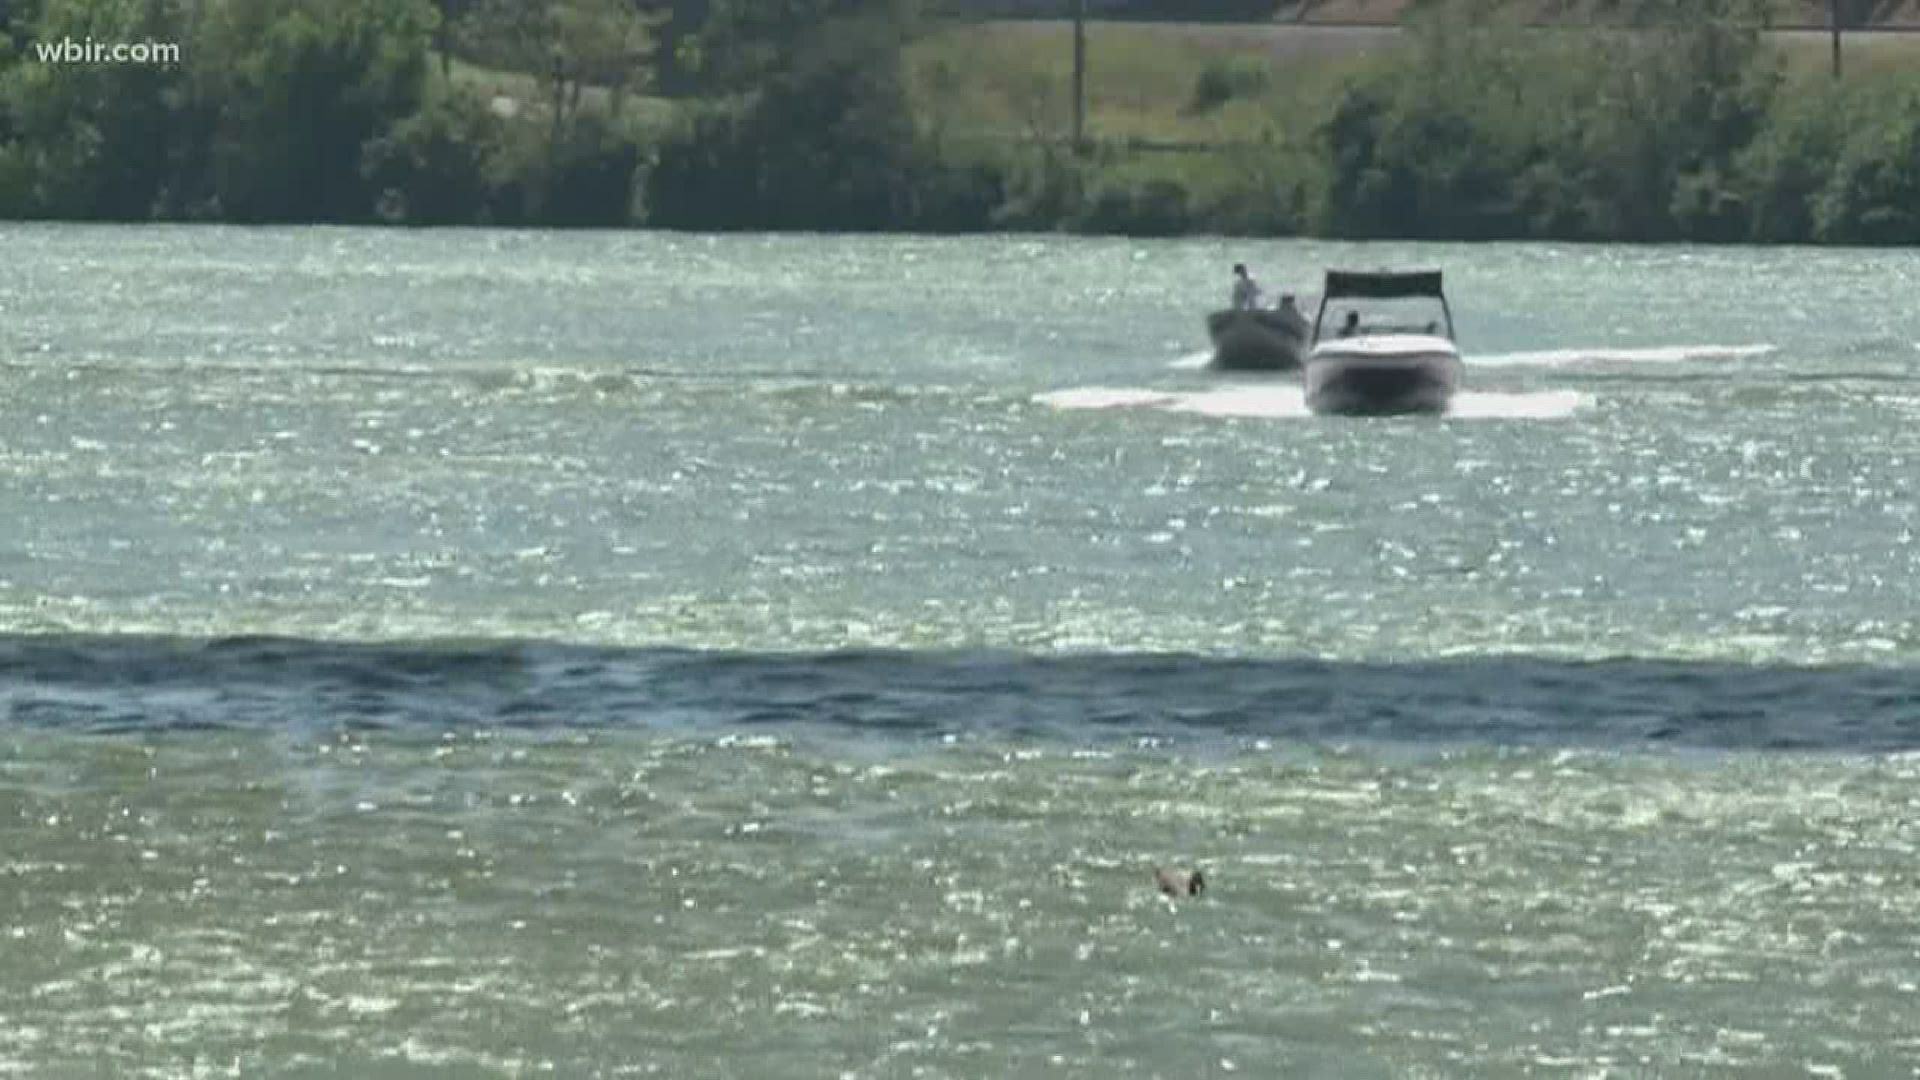 The Tennessee Wildlife Resources Agency is cracking down on boating safety today, as people head outside for Memorial Day.